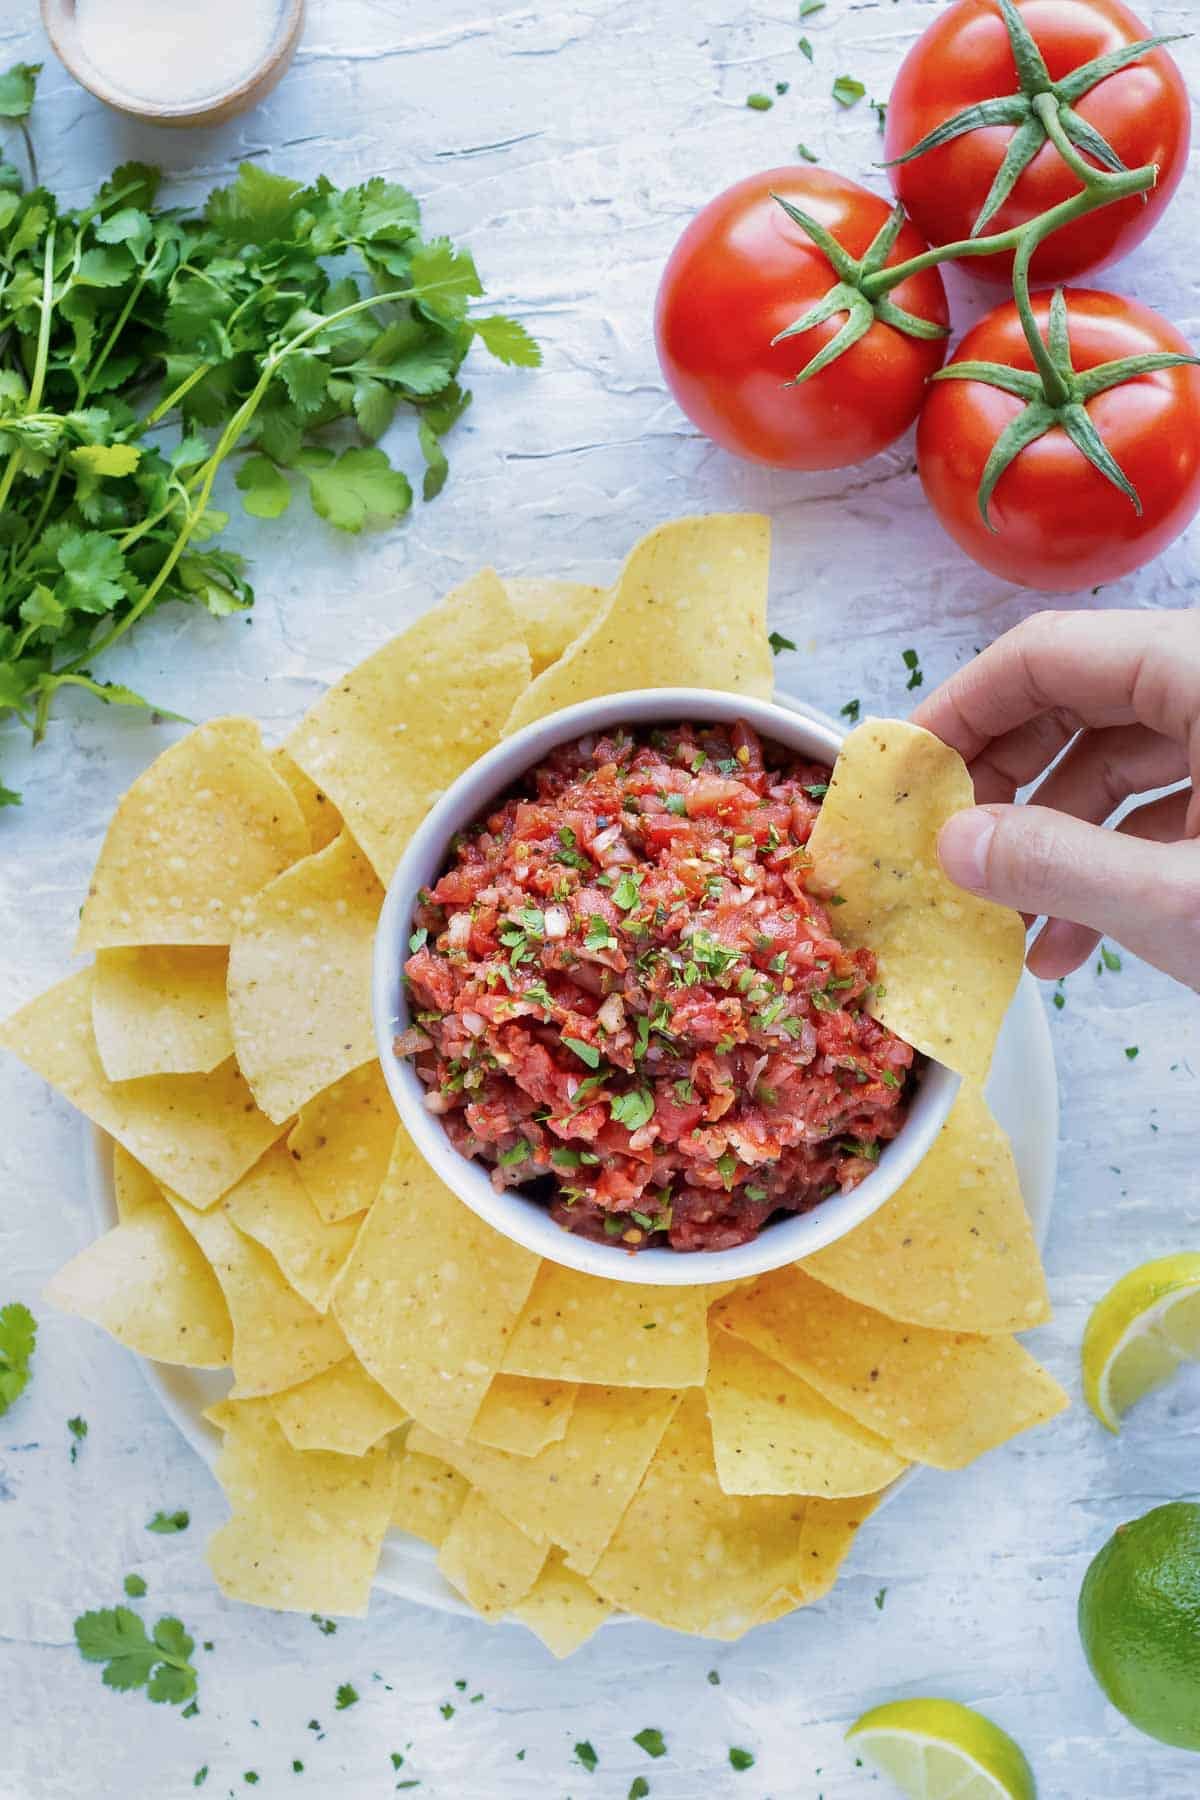 A hand dipping a tortilla chip into a bowl full of restaurant style tomato salsa with fresh tomatoes and cilantro next to it.